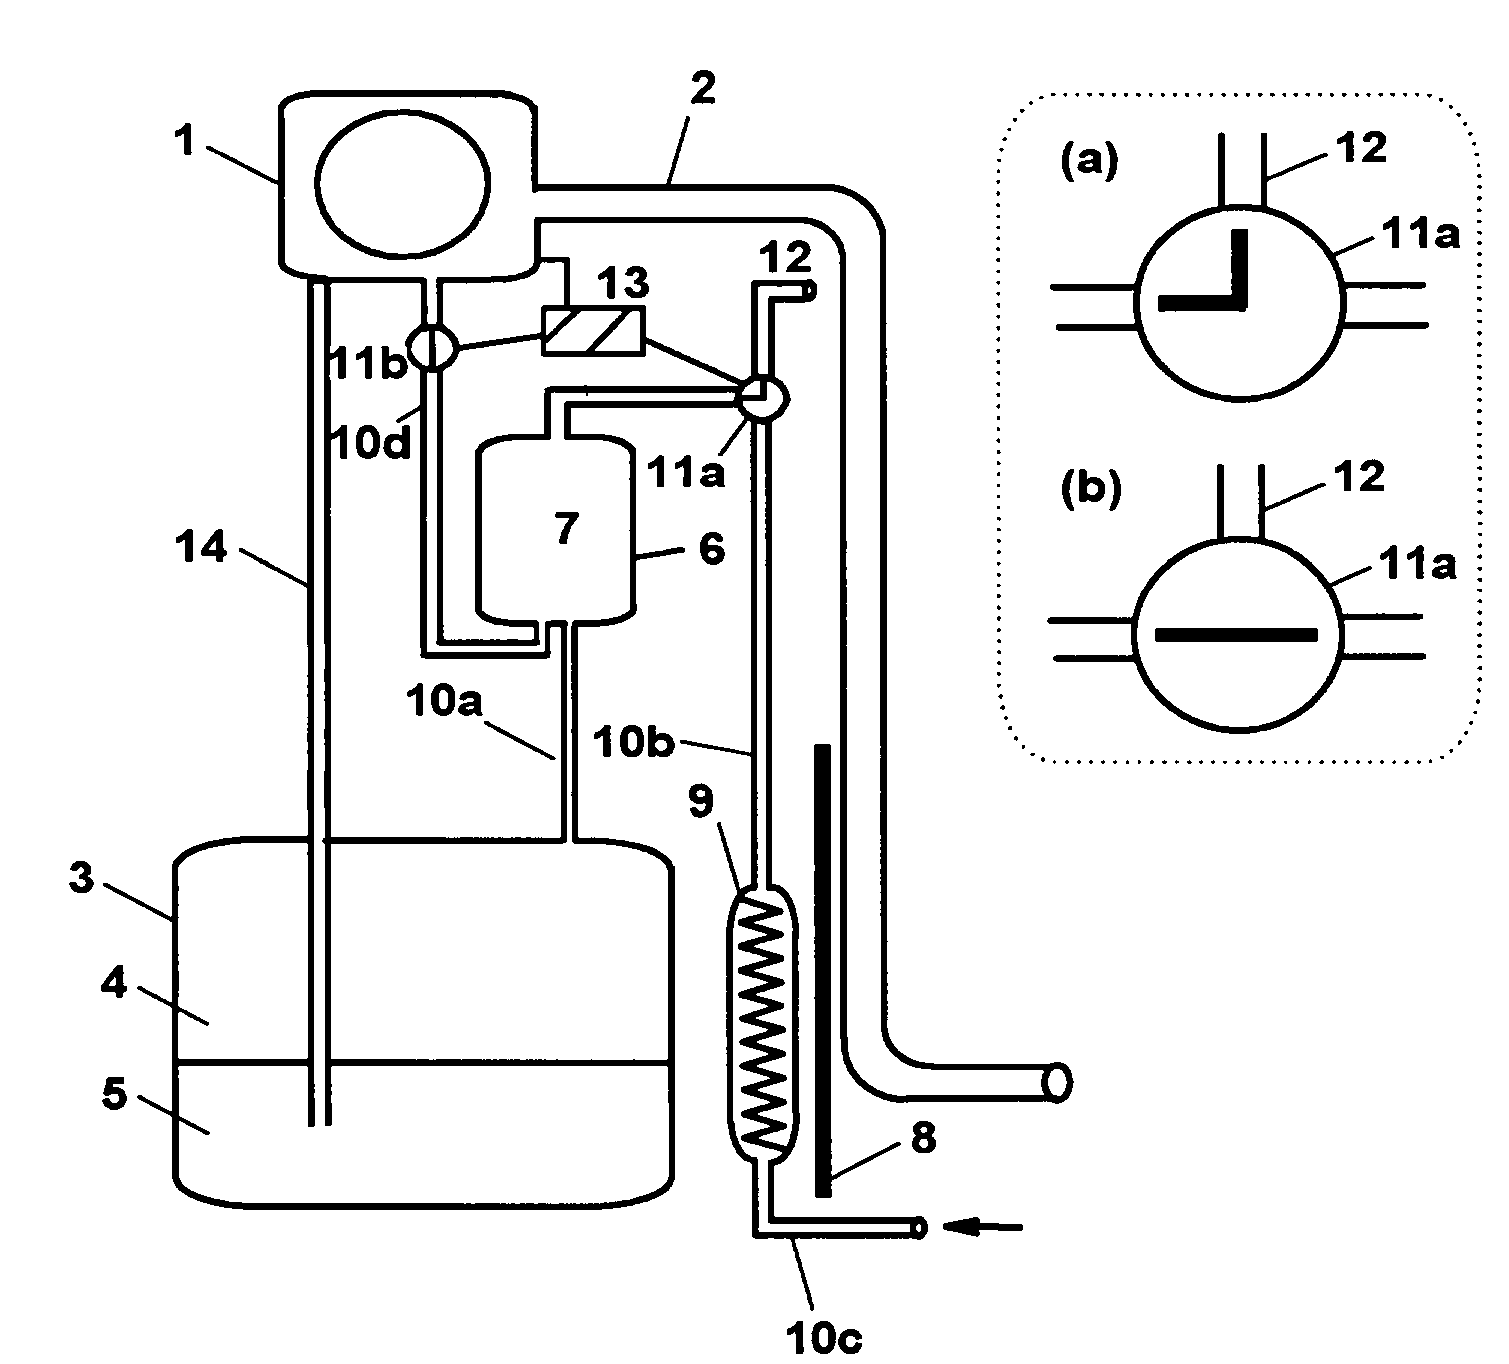 Fuel vapor storage and recovery apparatus with heat exchanger